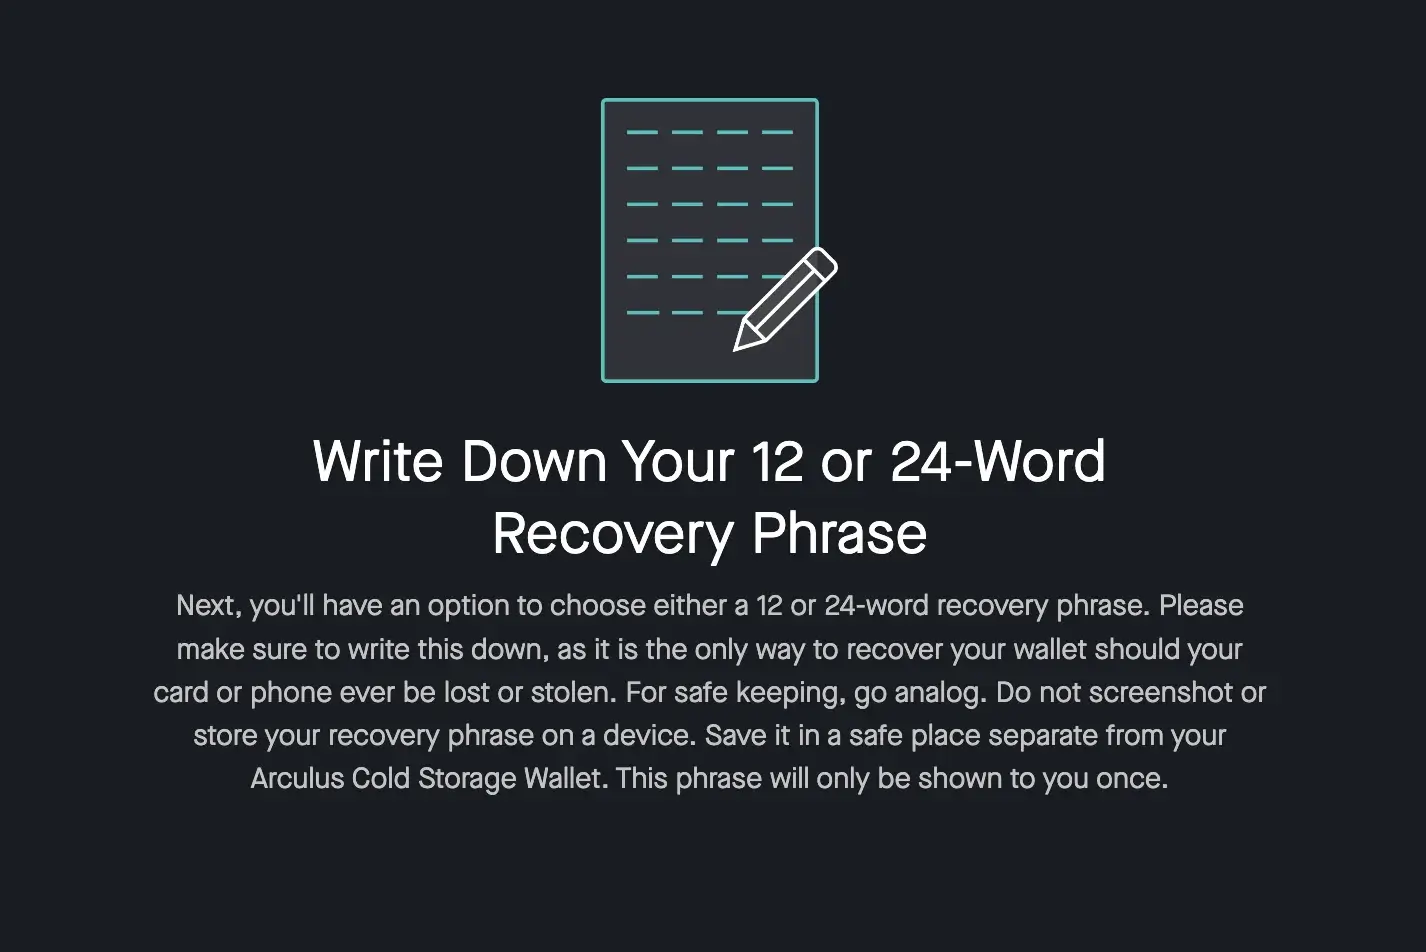 Step 5: Create a 12-word recovery phrase